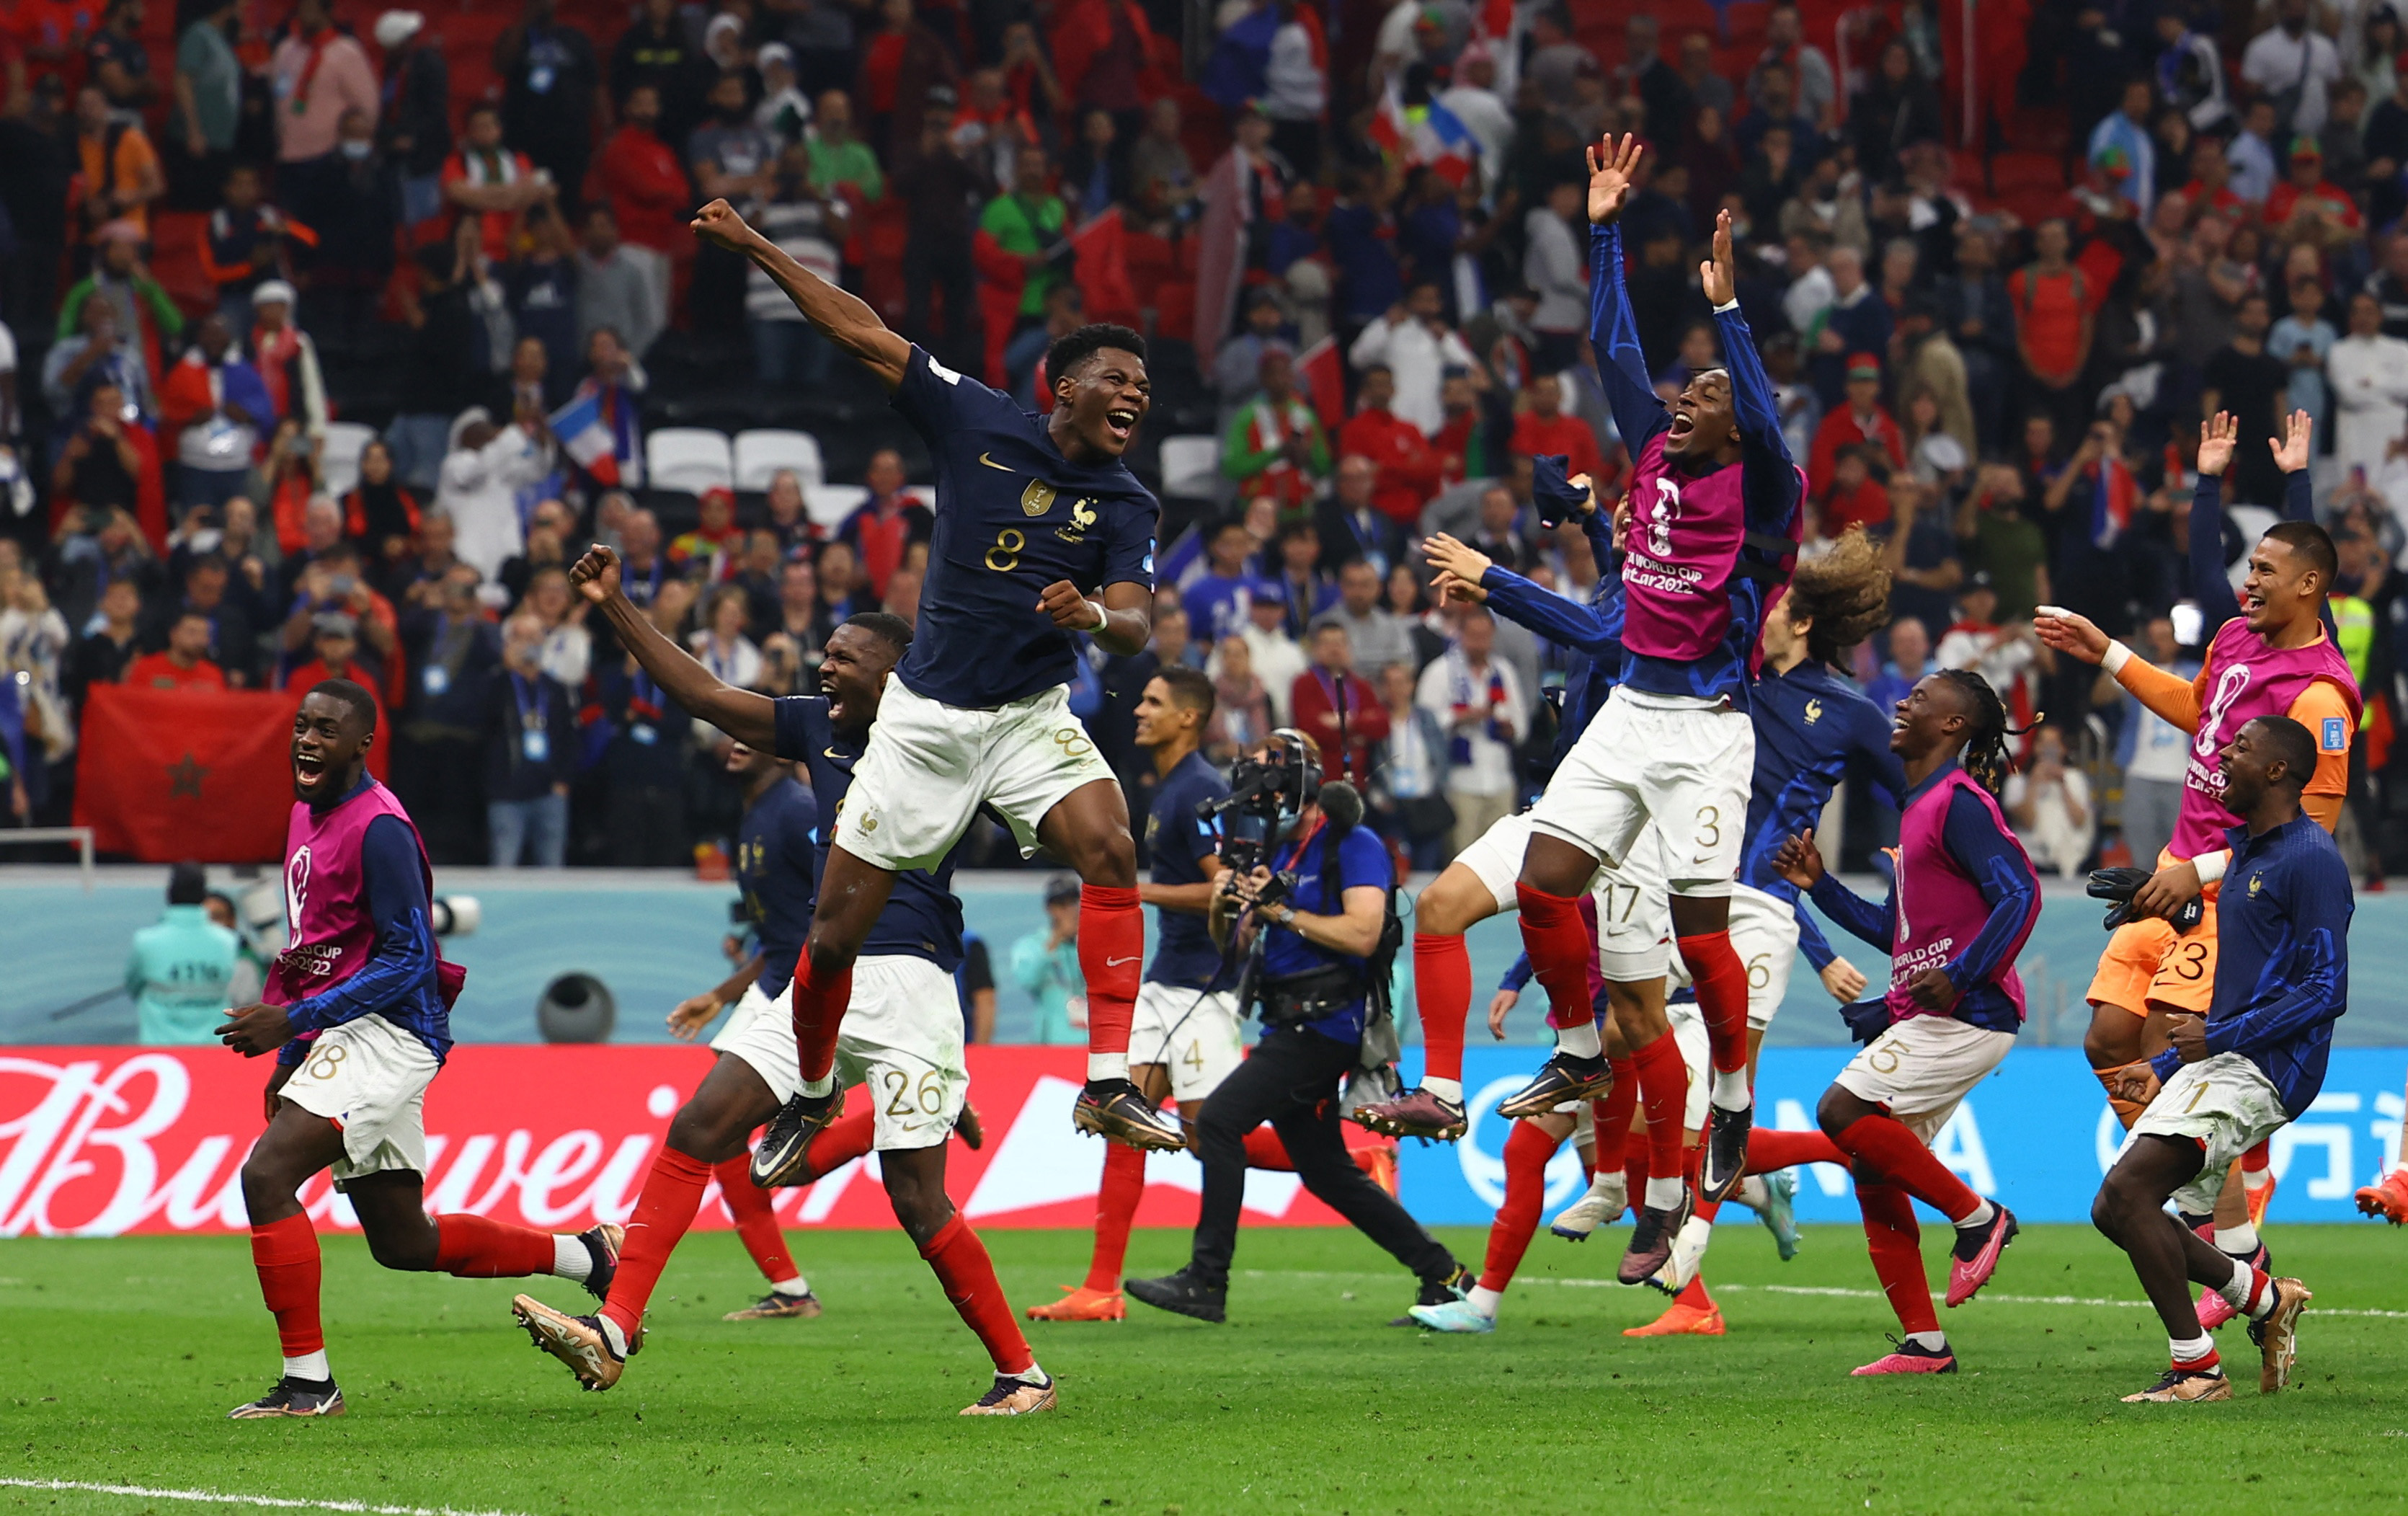 Live updates: France vs Morocco and other World Cup news